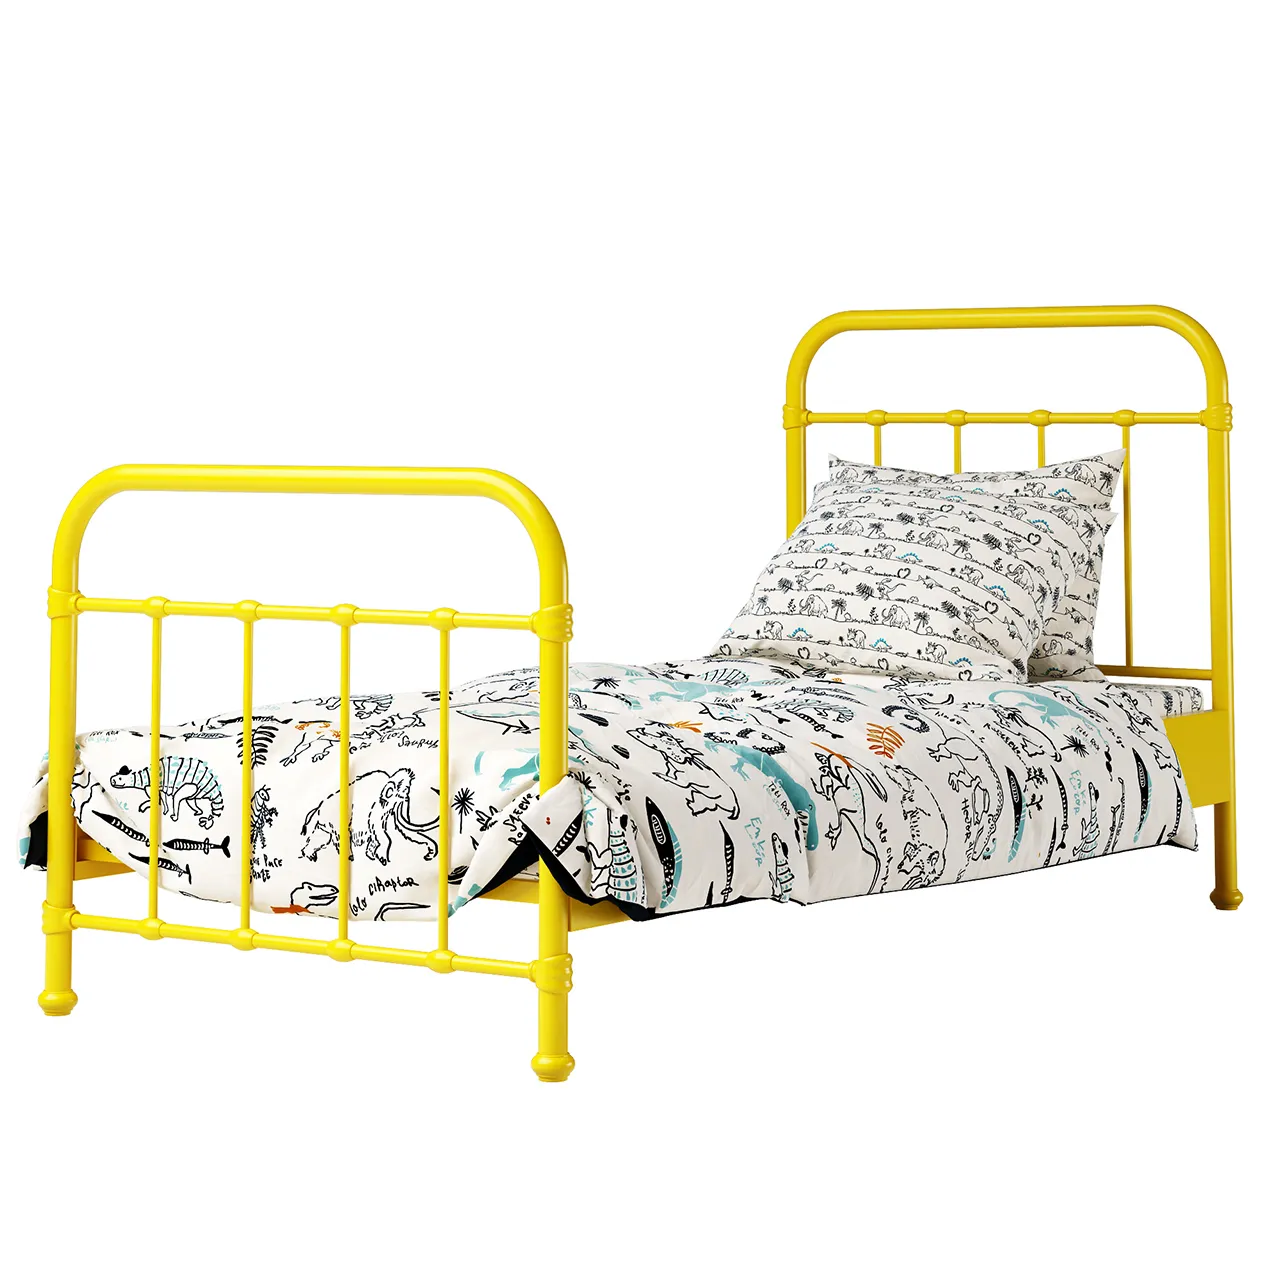 Kids – new-york-single-bed-by-vipack